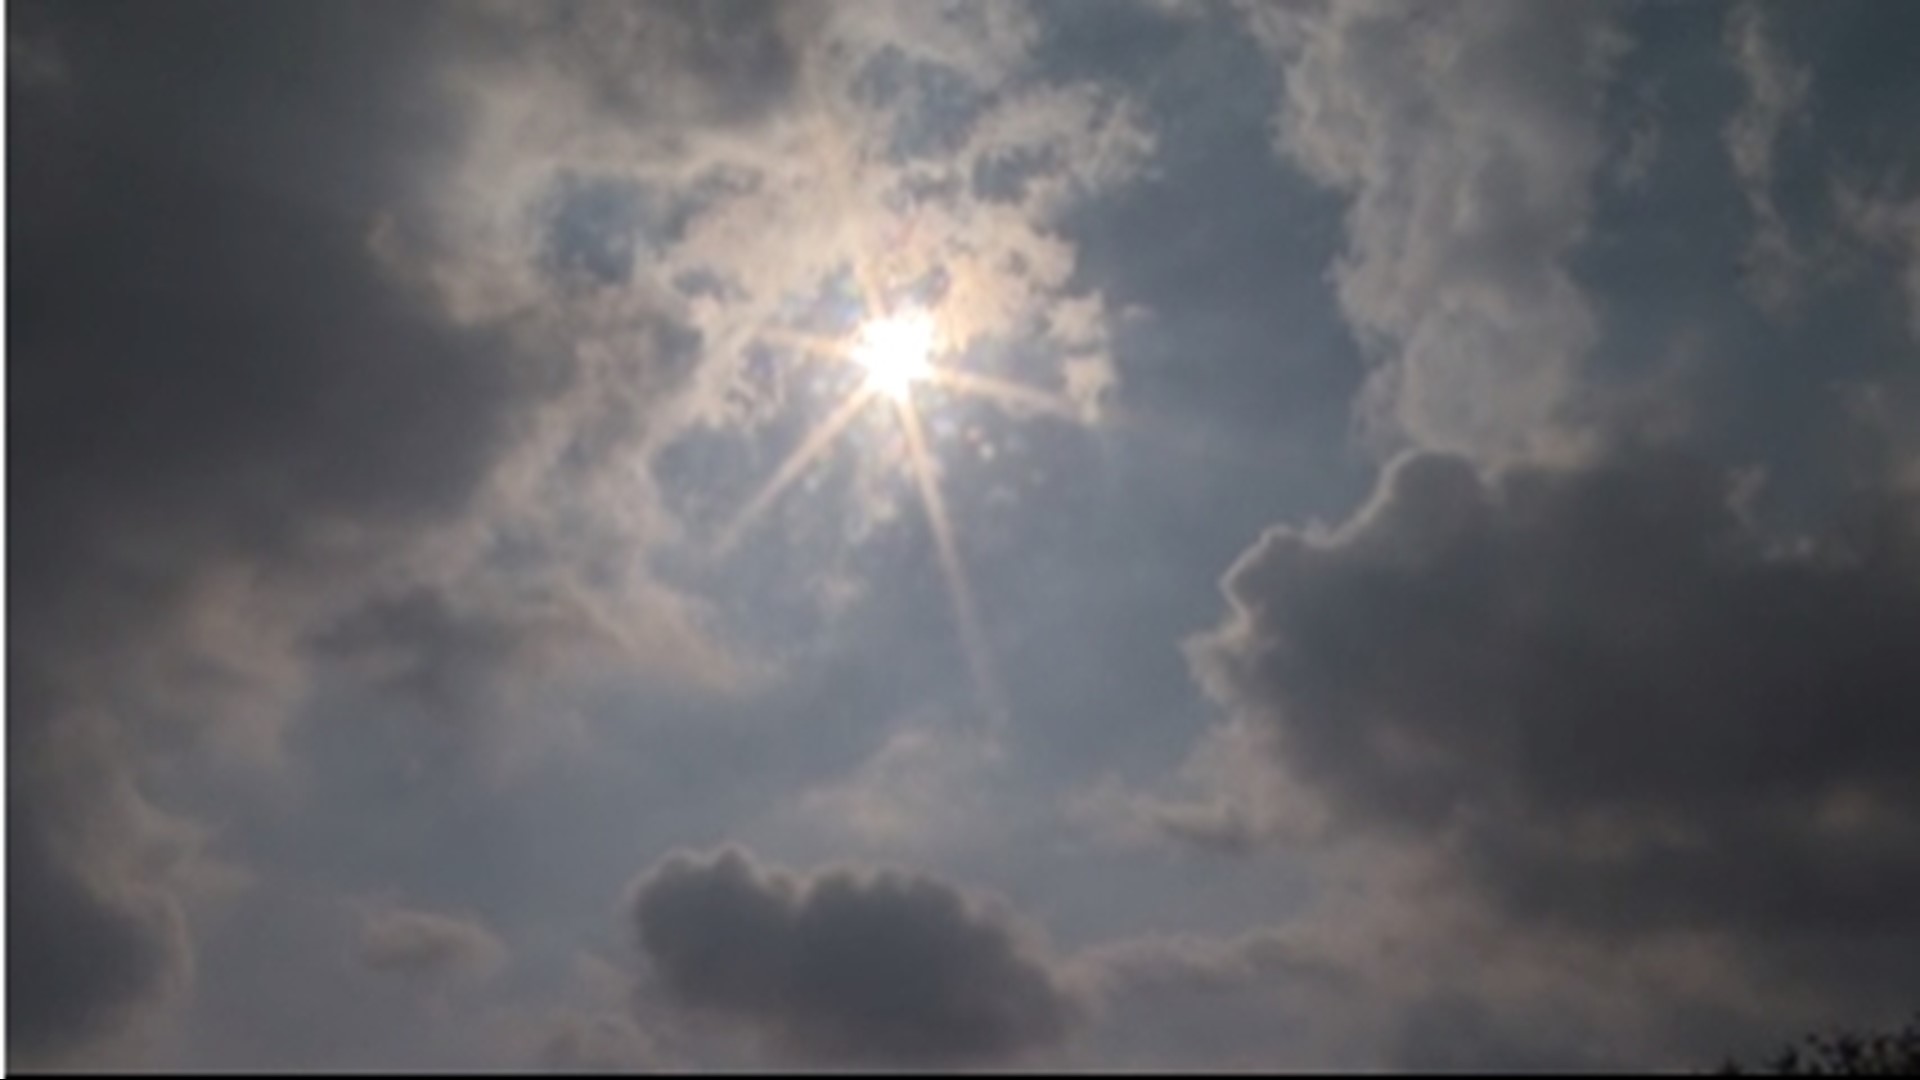 A grueling heatwave is expected to bake the St. Louis area in late August.